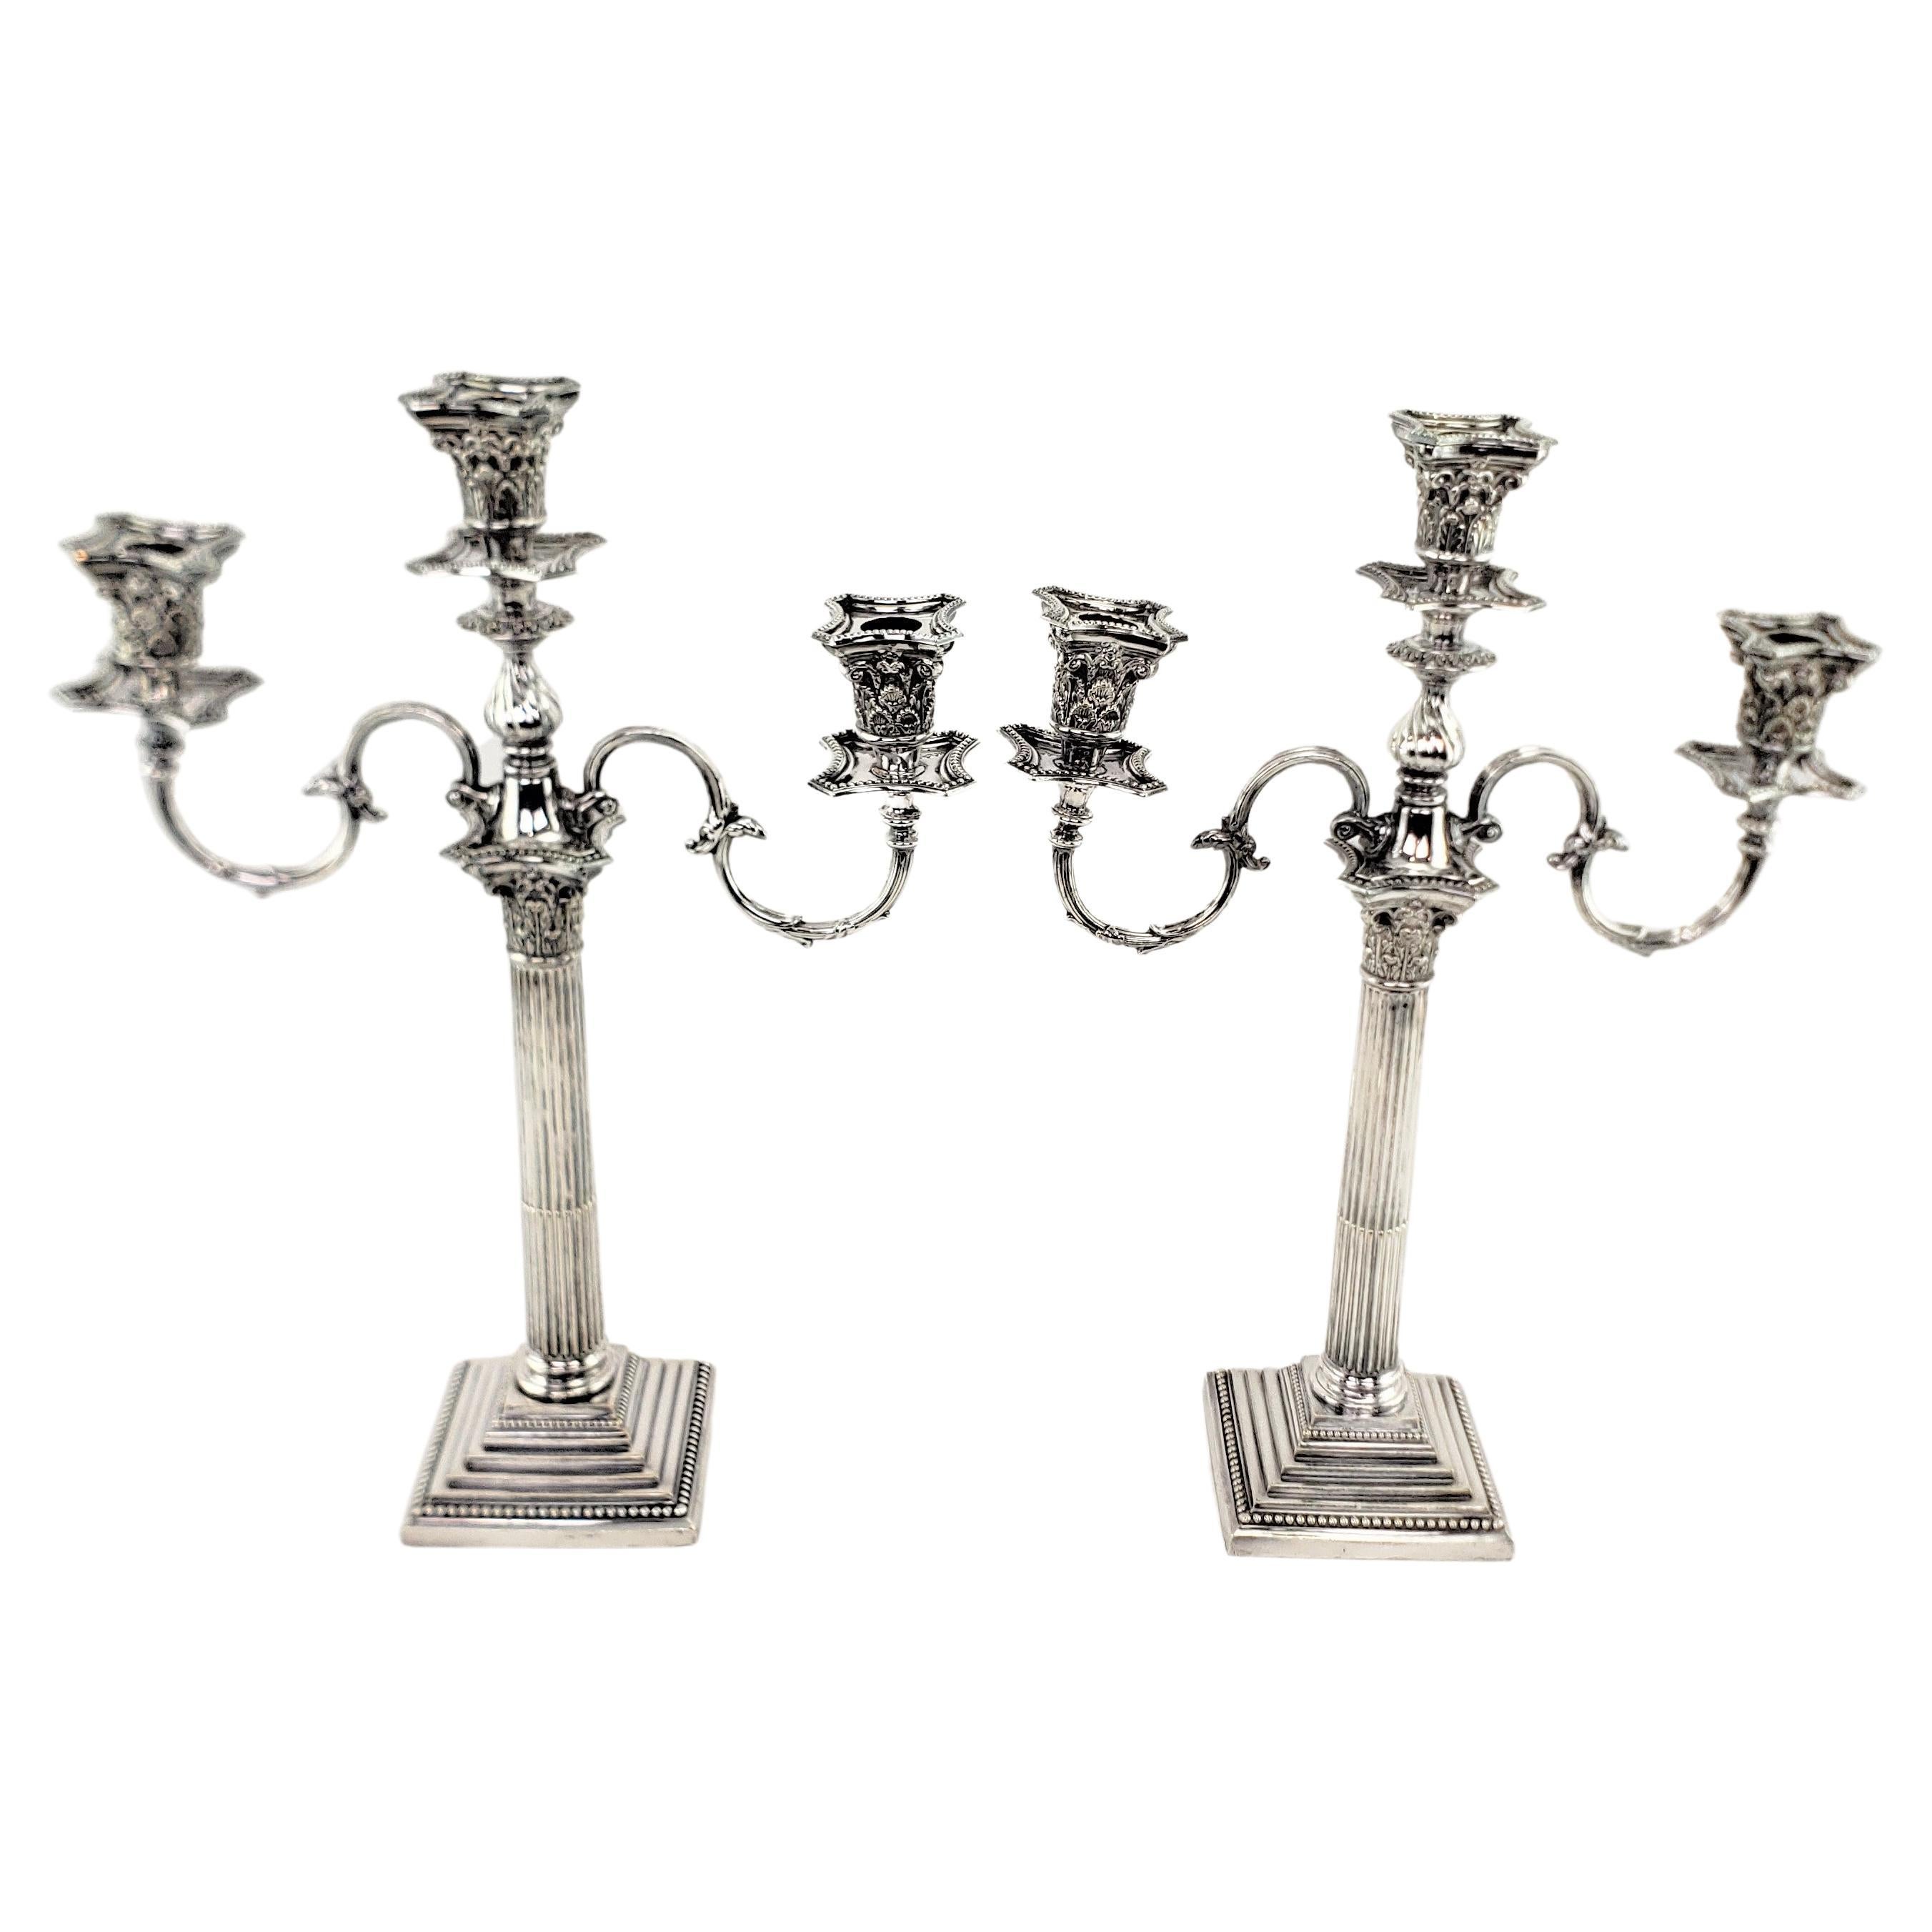 Pair of Antique Mappin & Webb Convertible Candelabras in Corinthian Column Style For Sale